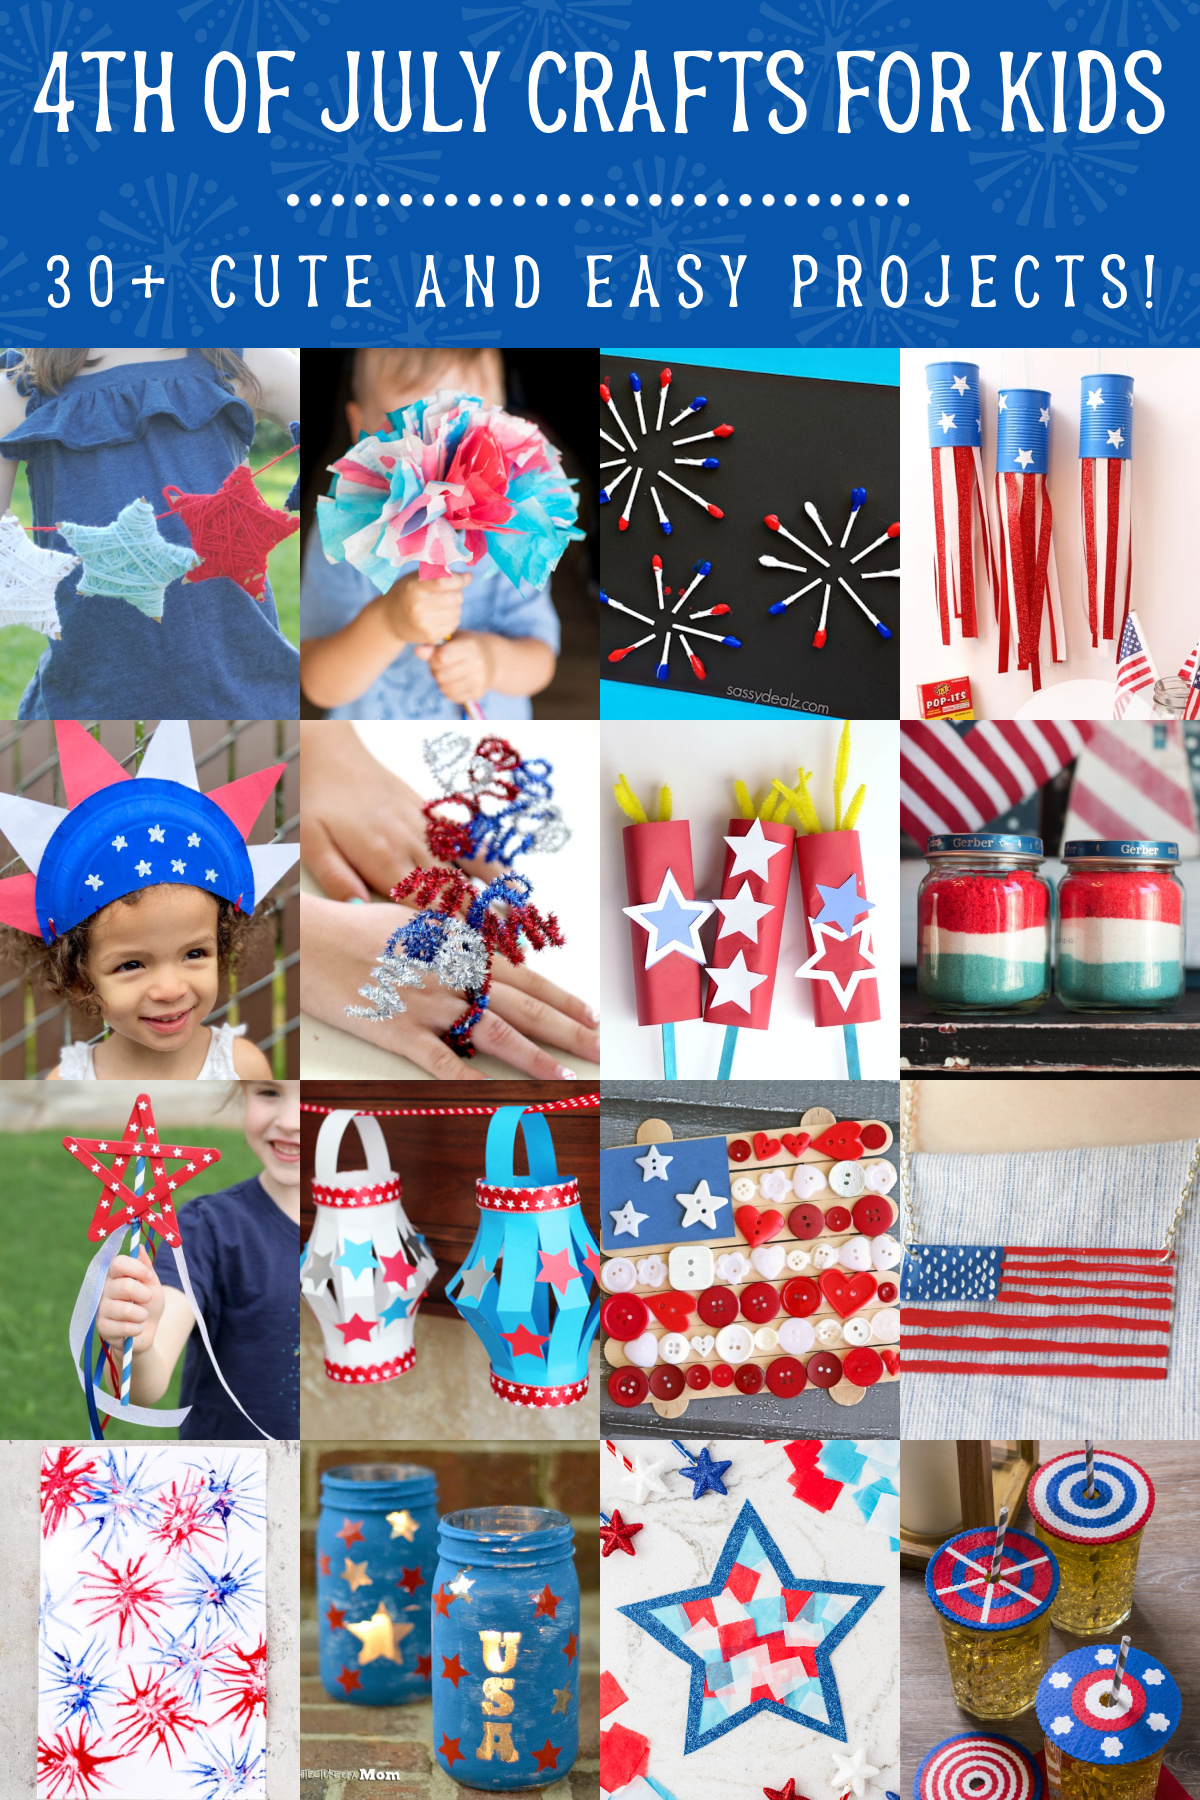 4th of July crafts for kids they'll love